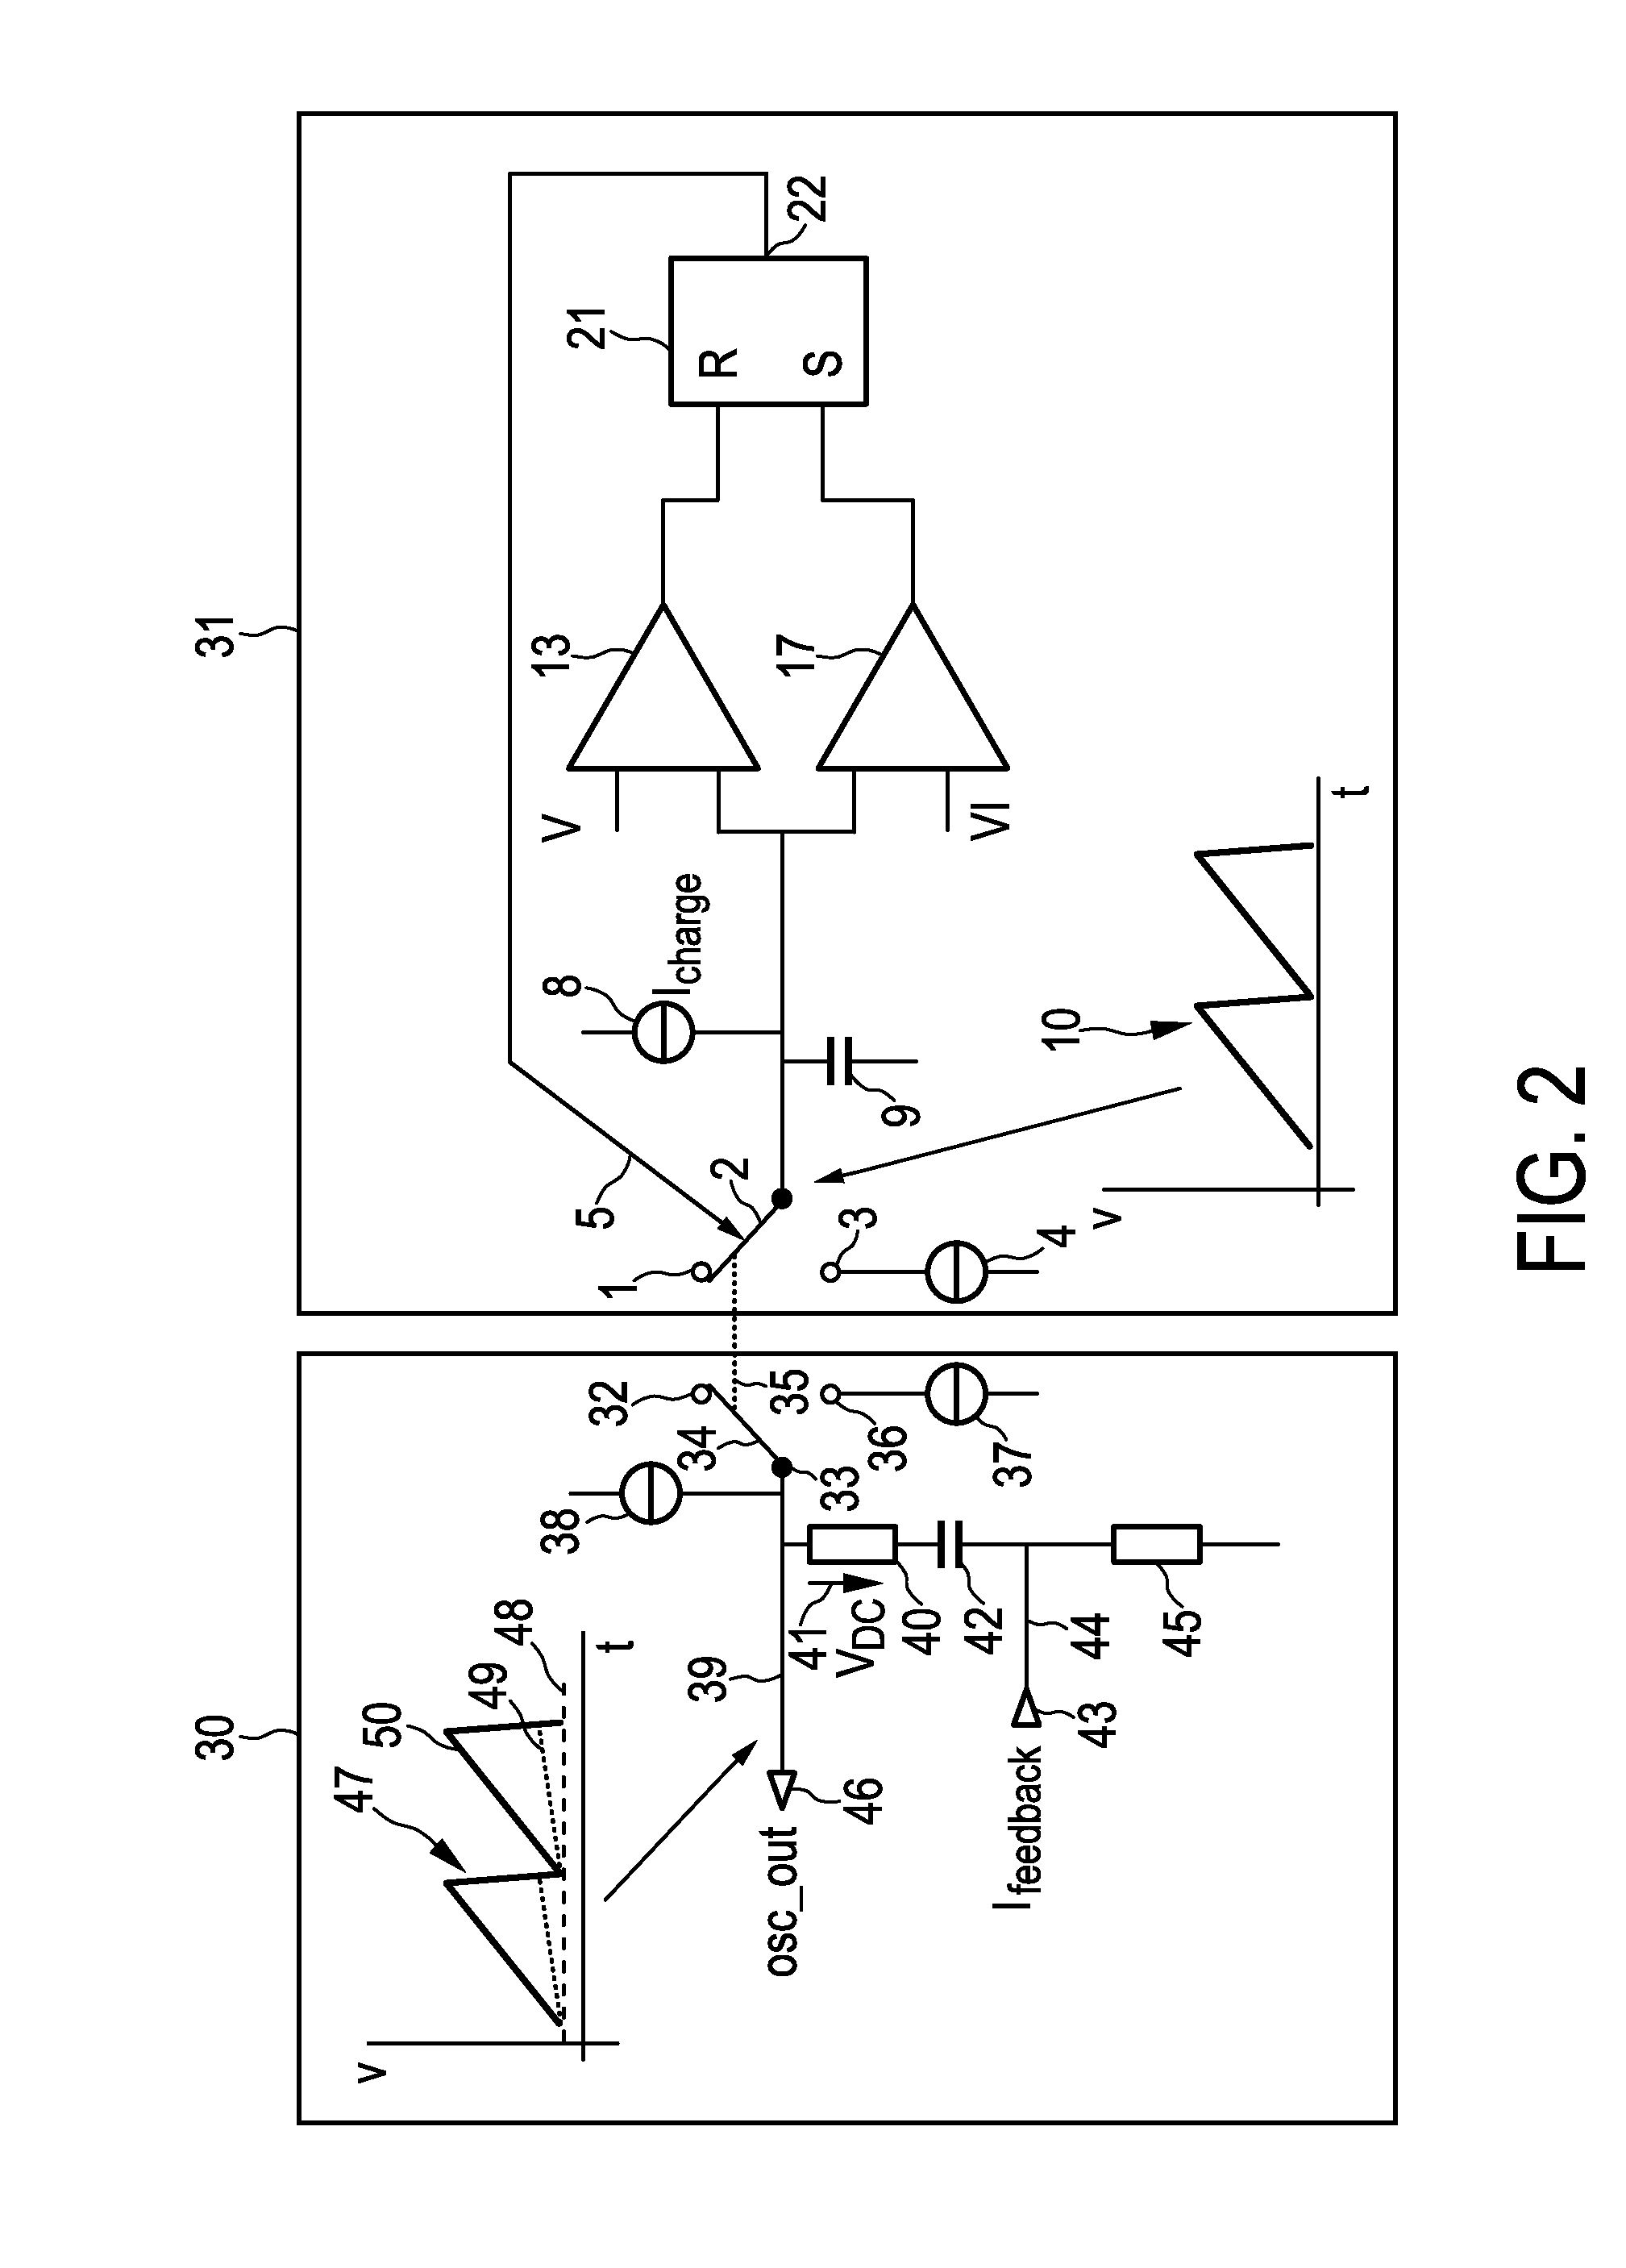 Power supply and dc-dc-conversion